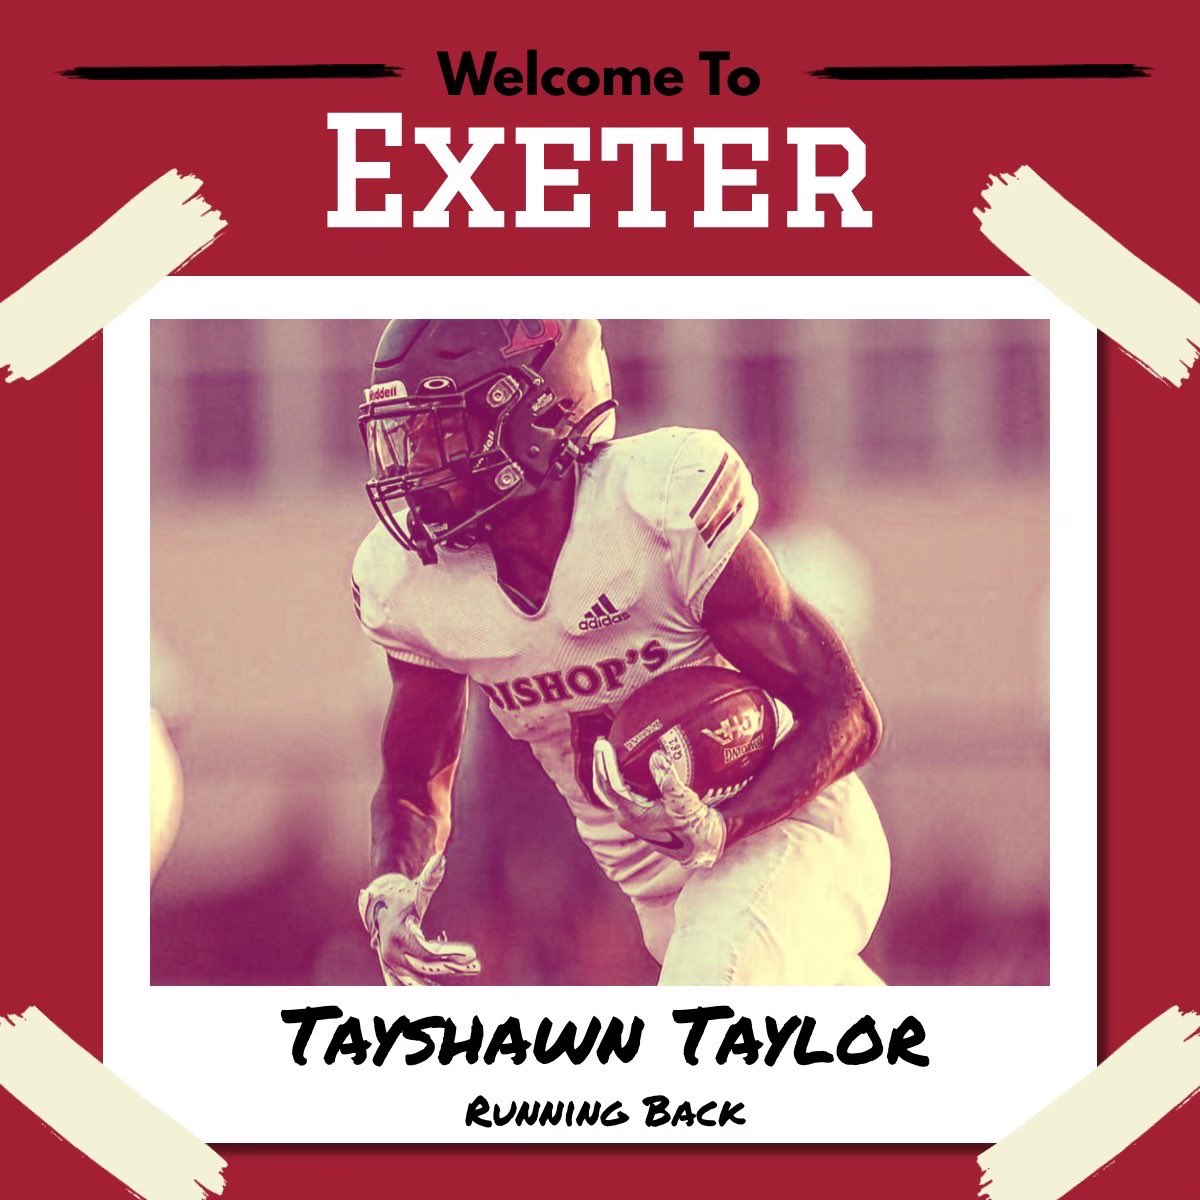 I have decided to take a post grad year at Exeter and reclassify to the class of 2025. Thank you @BishopsFootball for the last 4 years and thank you to @CoachV1781 and @PEAFootball for this amazing opportunity